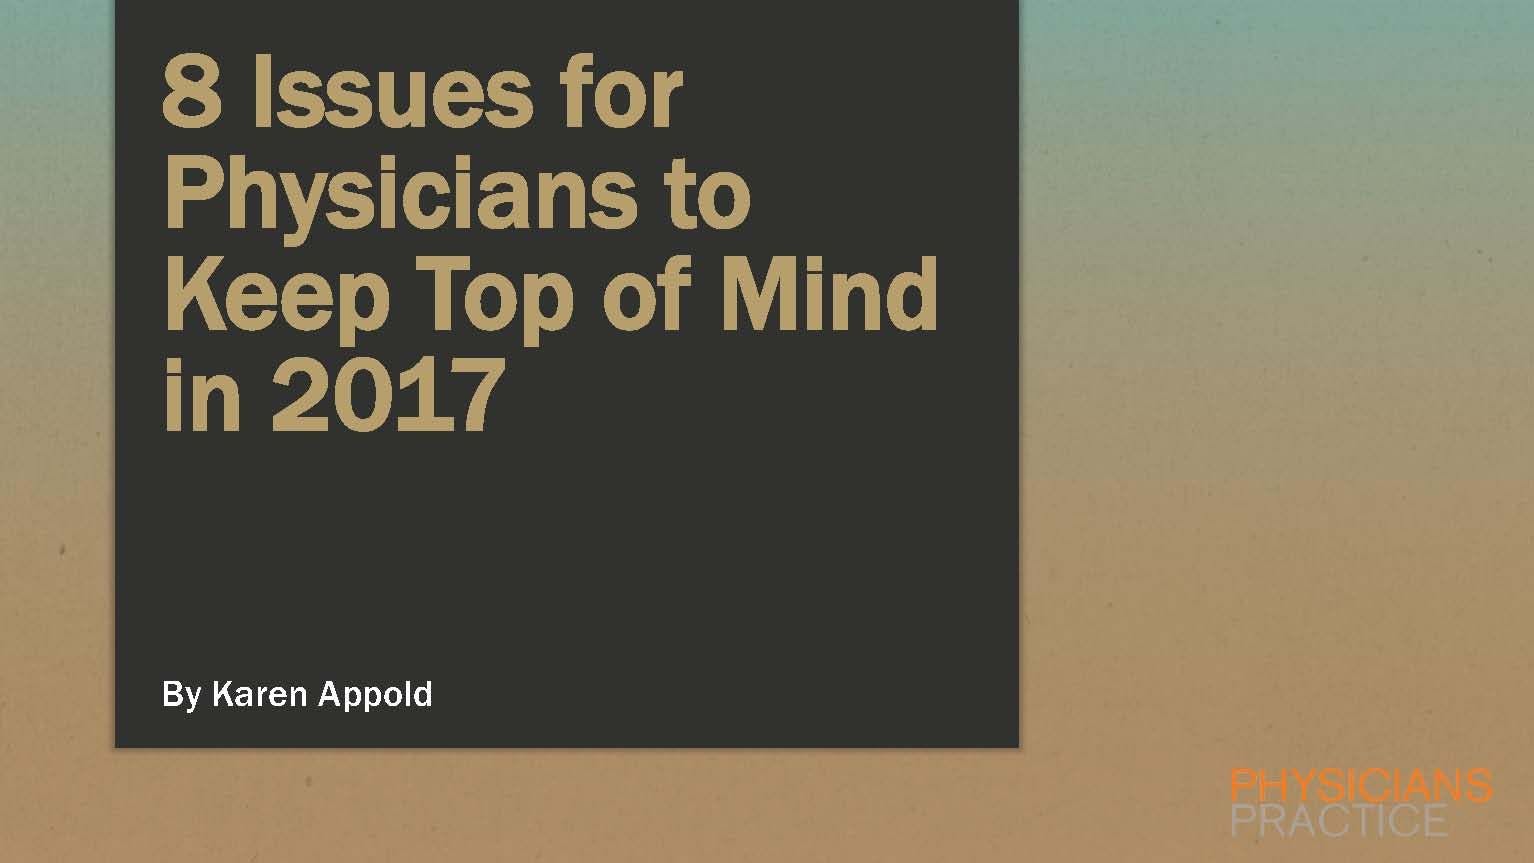 8 Issues for Physicians to Keep Top of Mind in 2017